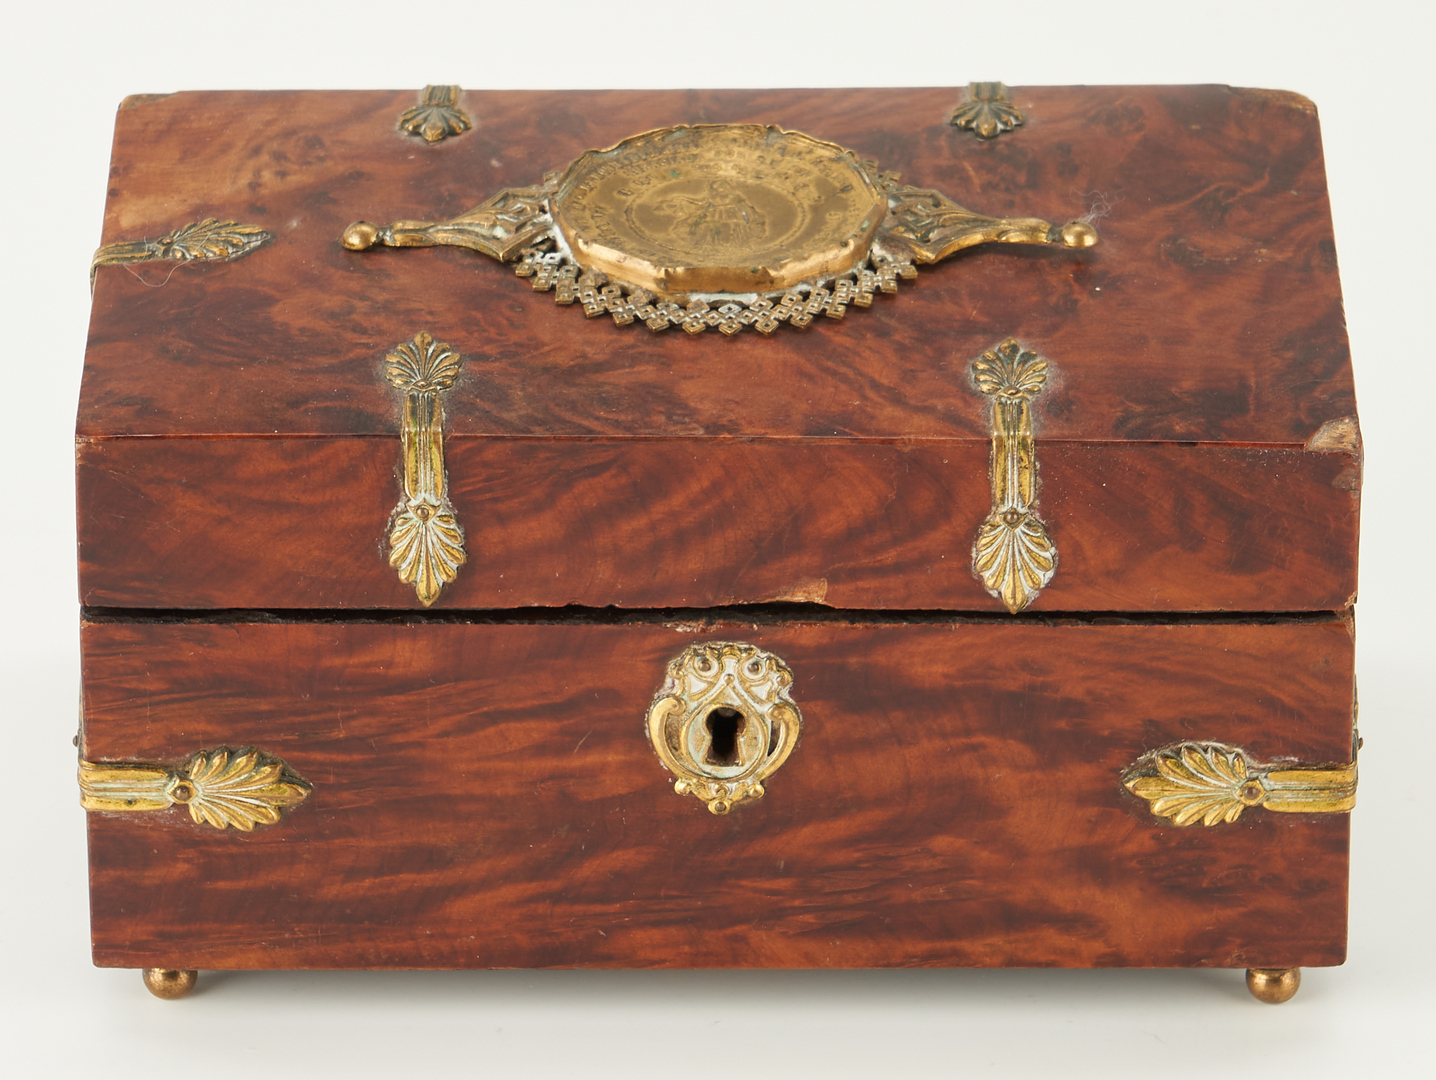 Lot 242: Burl Cigar Box, Silver Compact, and Frame